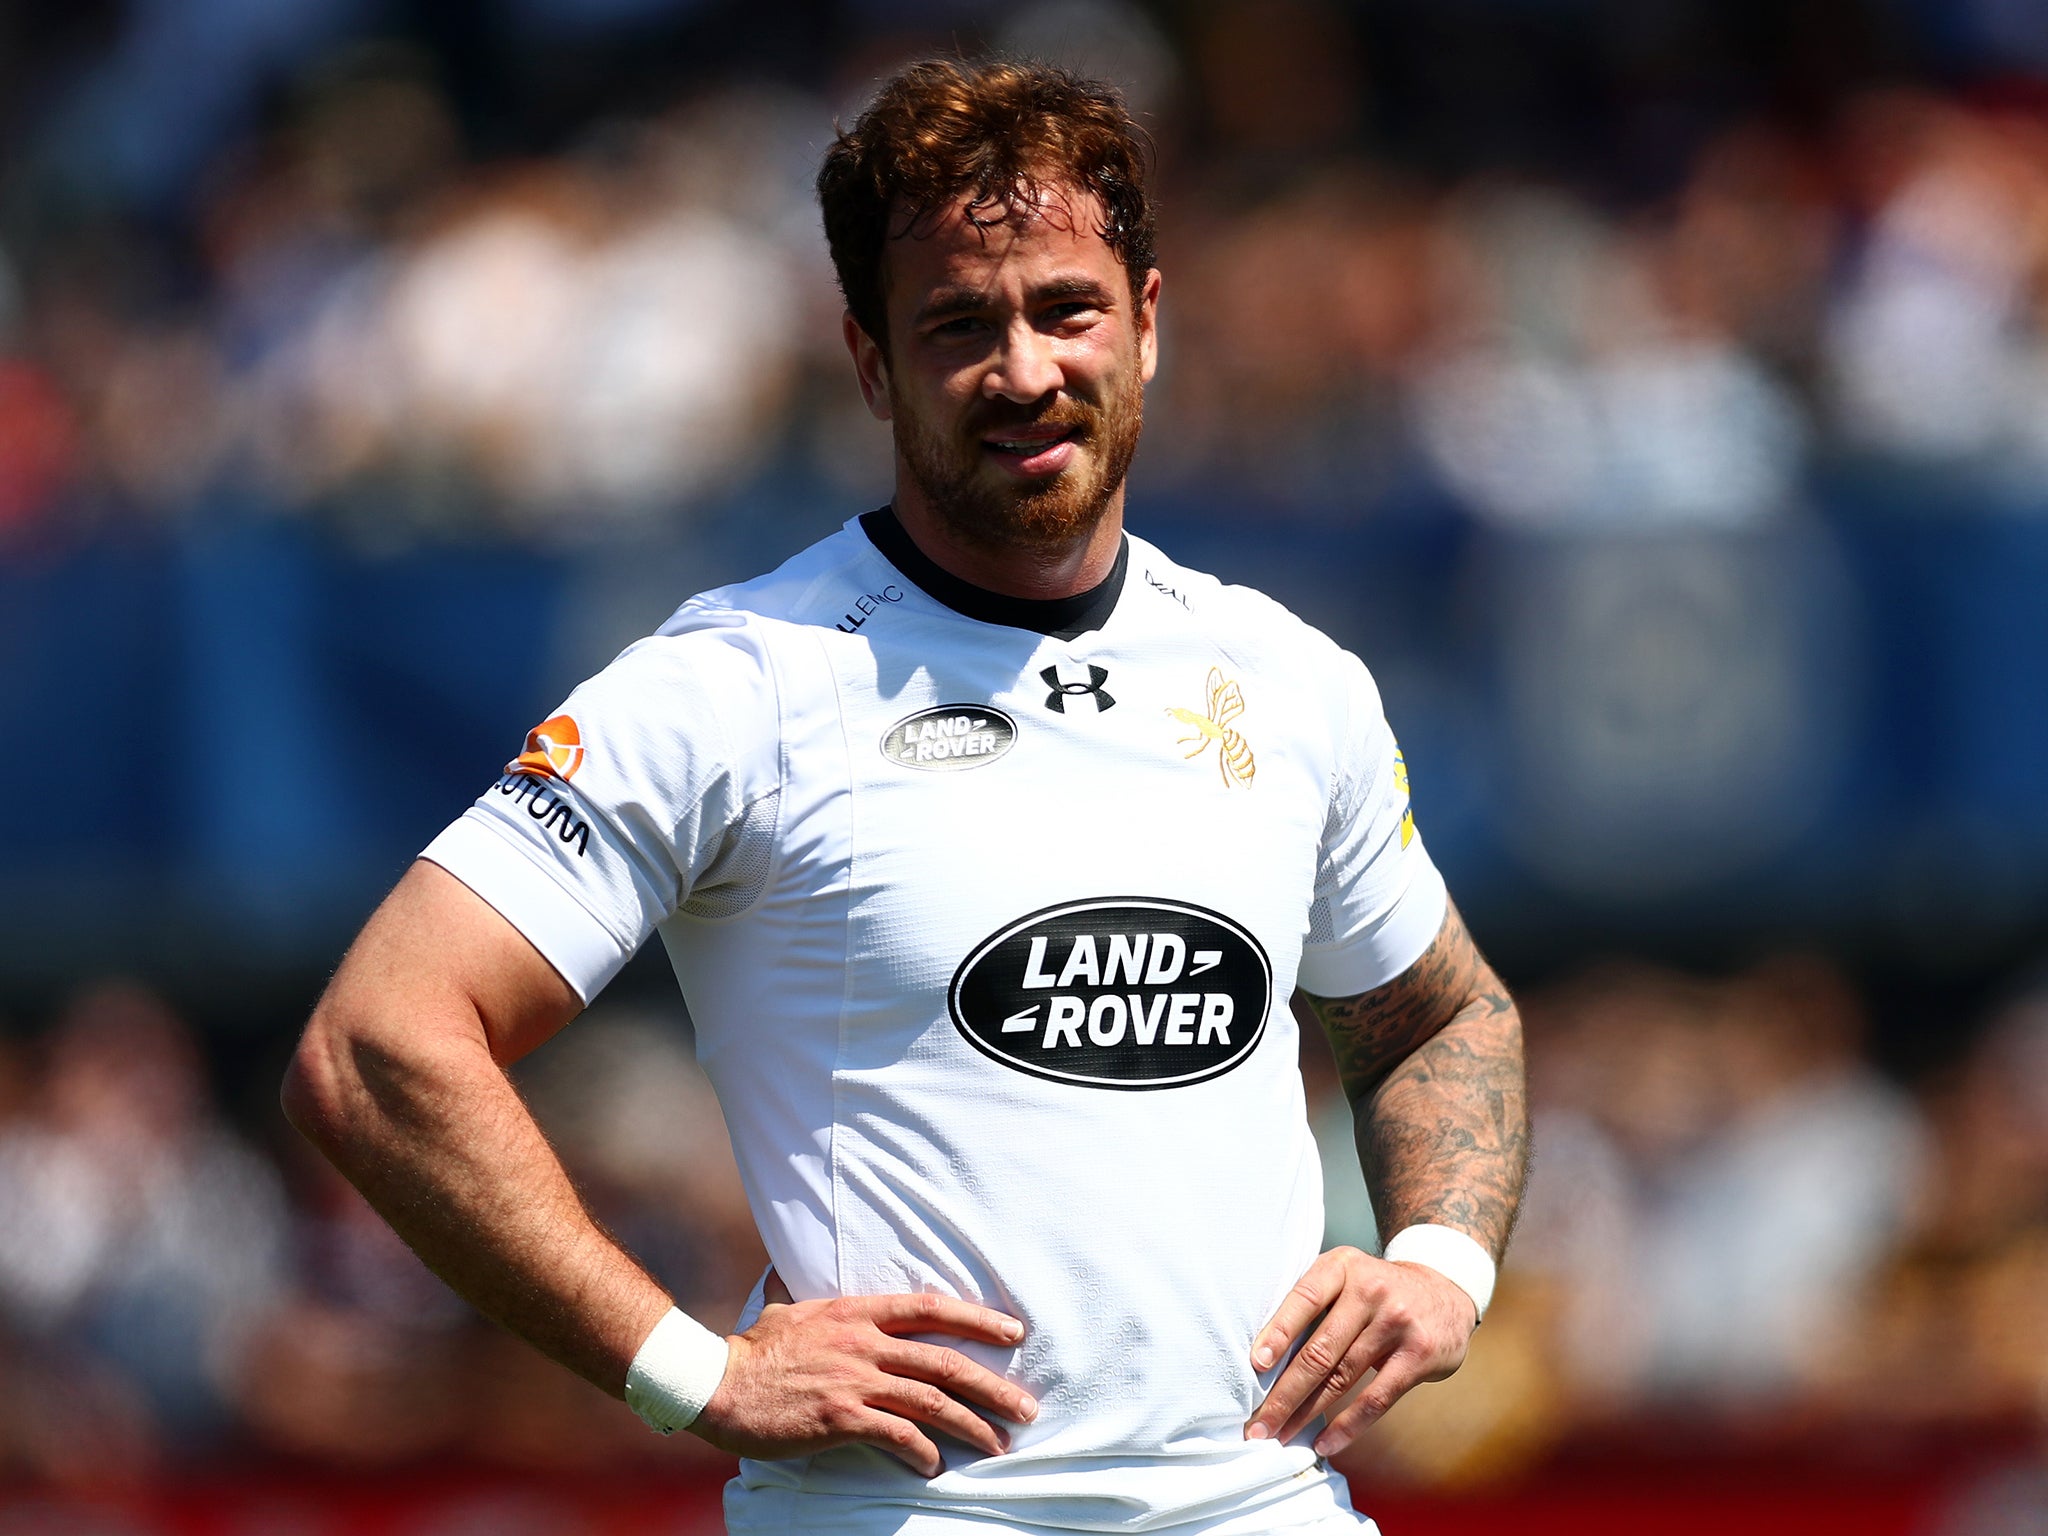 Danny Cipriani looks set to be used at full-back for England against the Barbarians